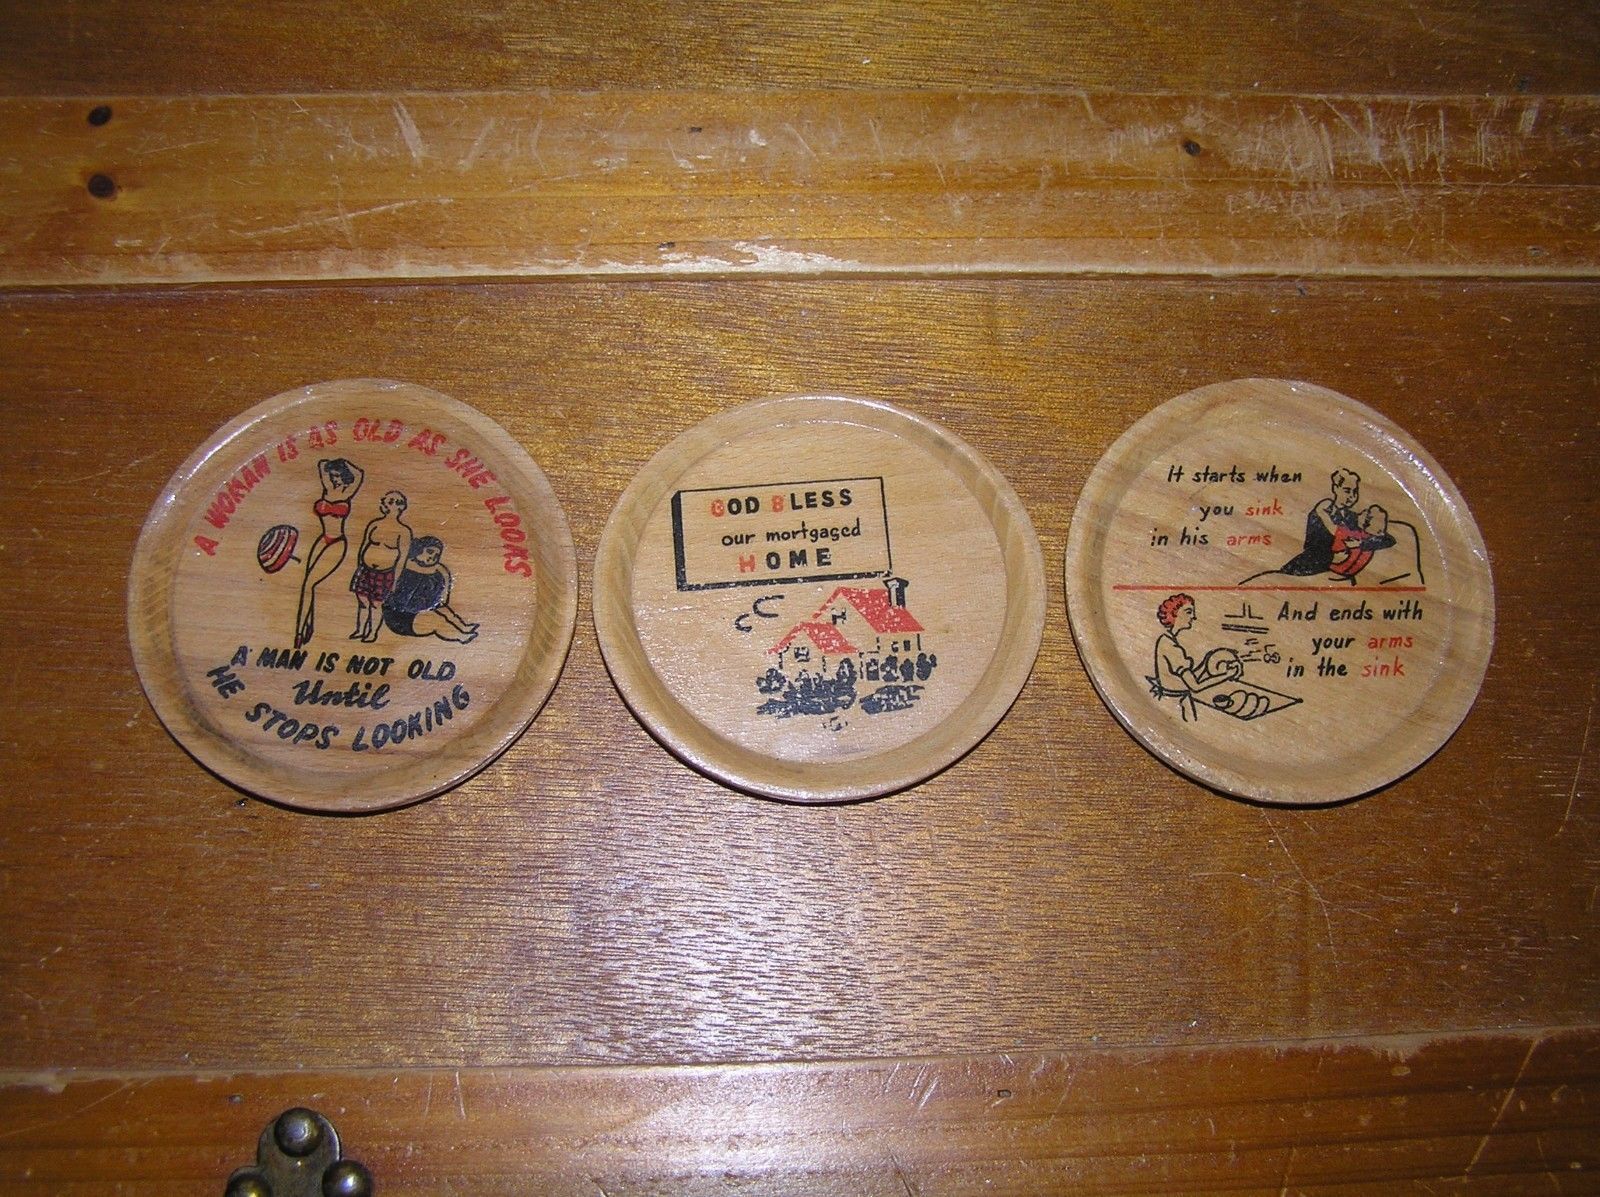 Vintage Lot of 3 Round Painted Wood Coasters with Funny Sayings – God Bless Our - $5.89